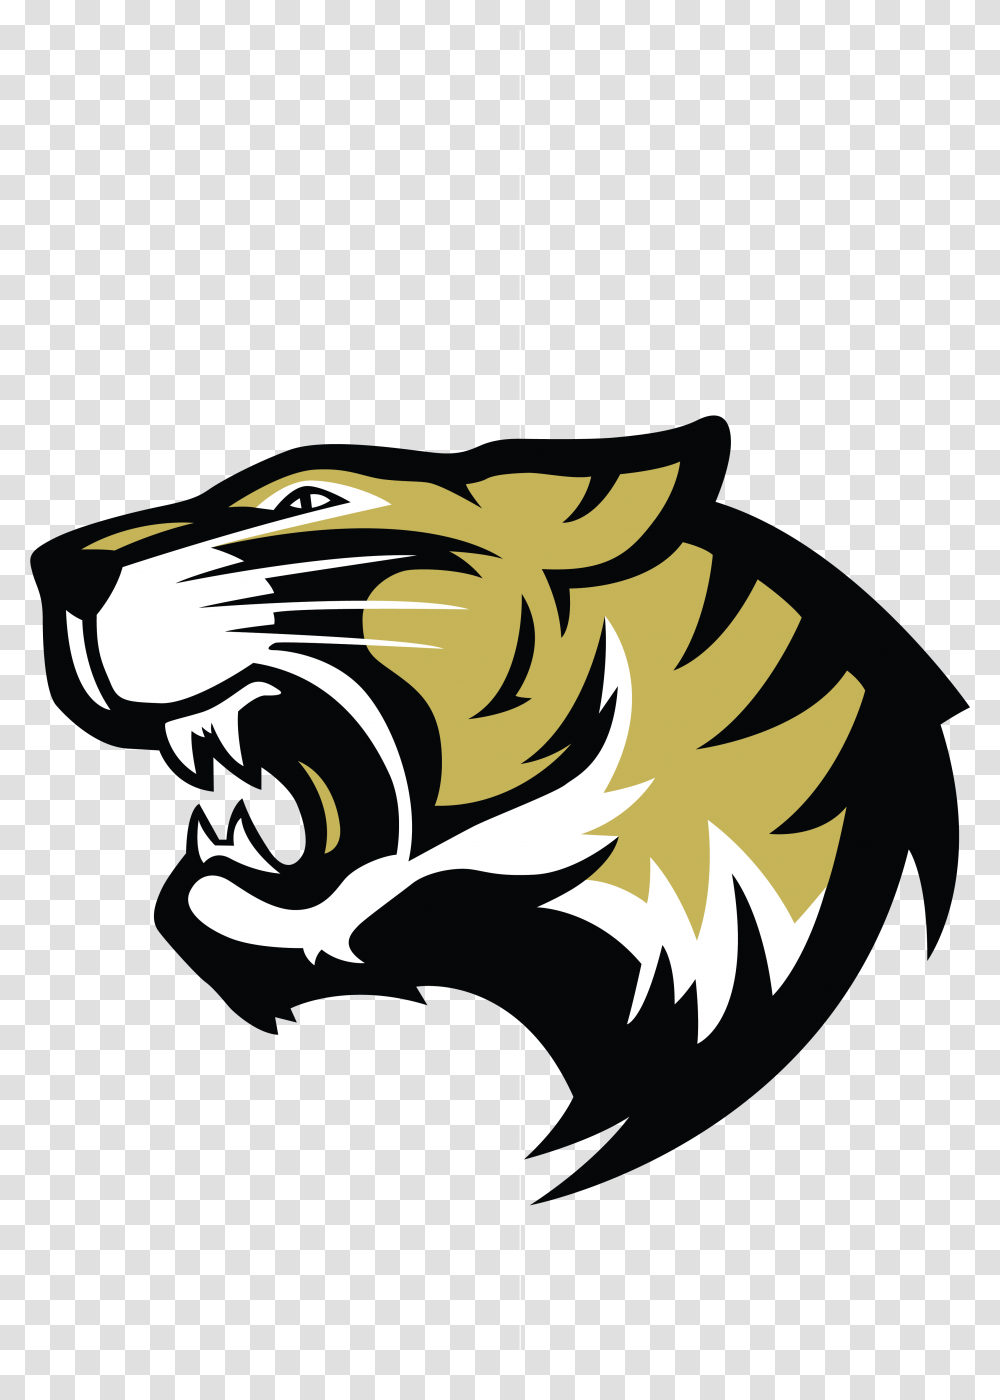 Irving Tigers Youtube Channel Logo Download, Mammal, Animal, Hook, Claw Transparent Png